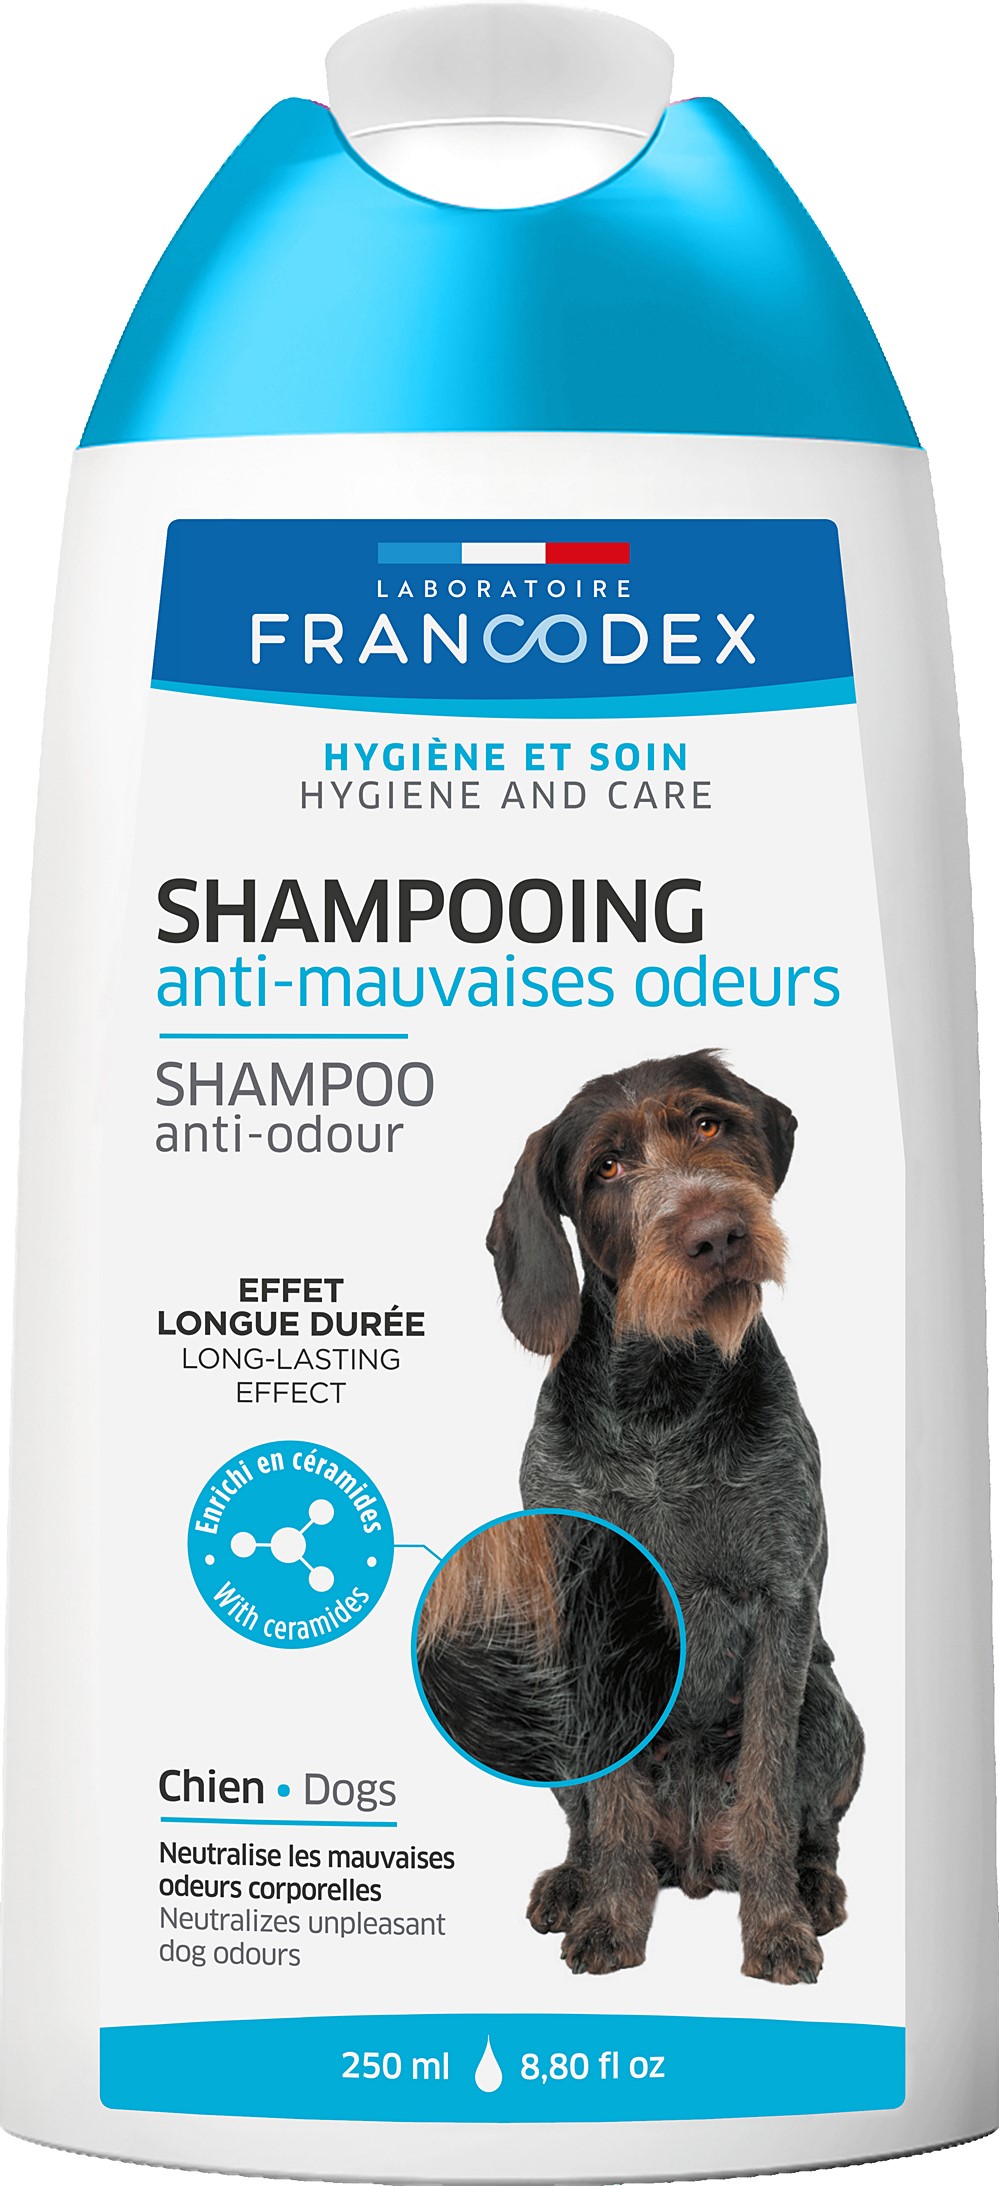 Shampooing chien antimauvaises odeurs 250 ml